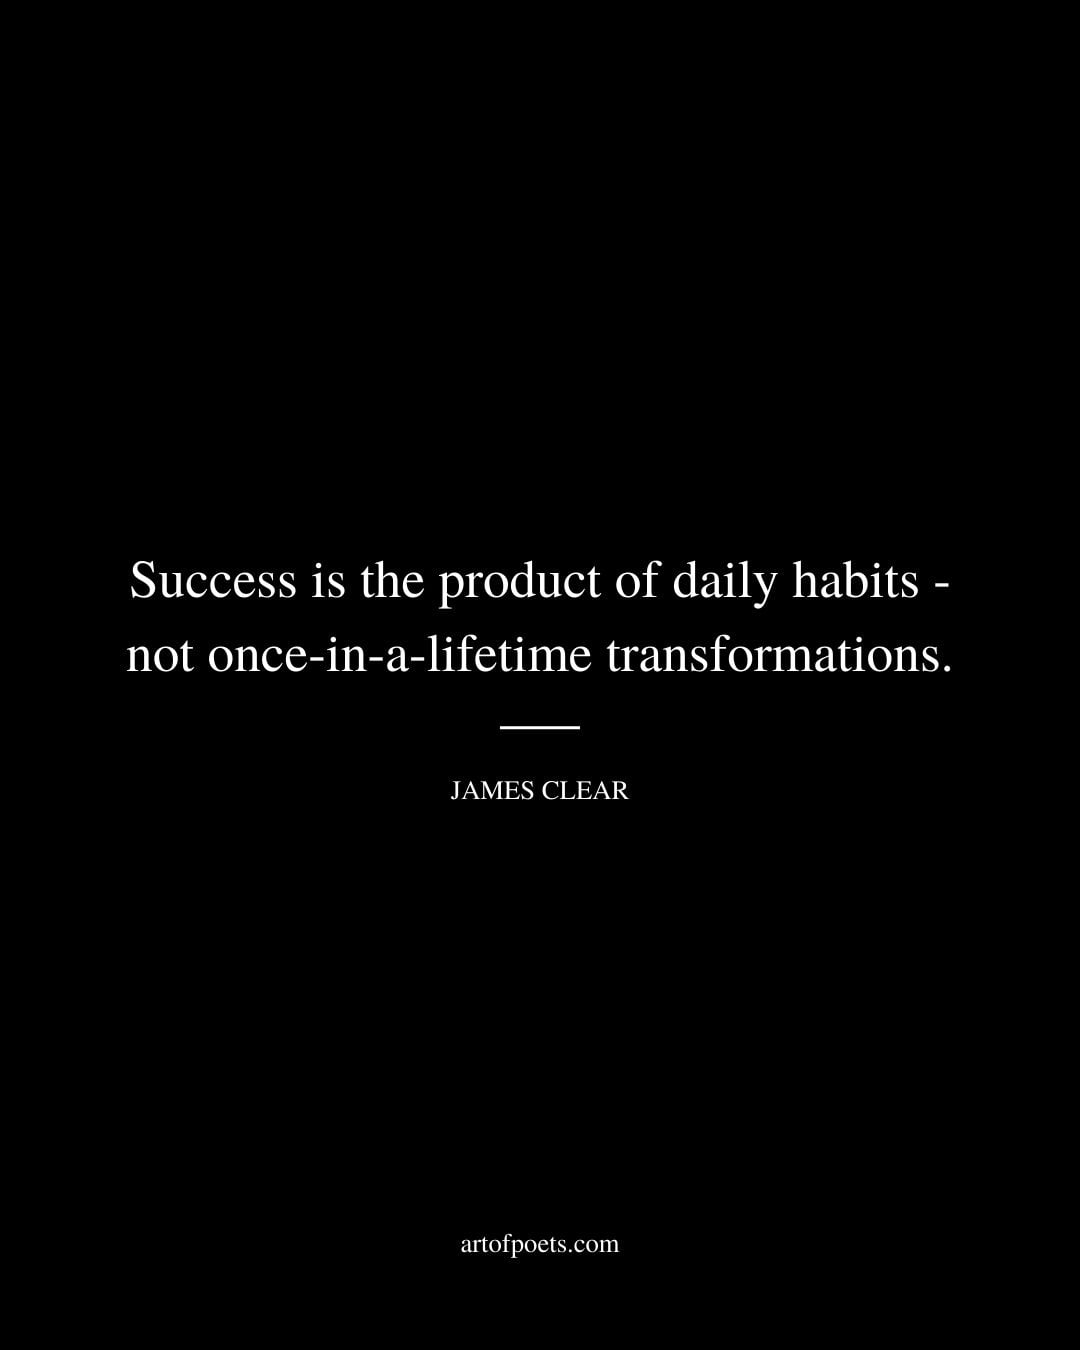 Success is the product of daily habits—not once in a lifetime transformations